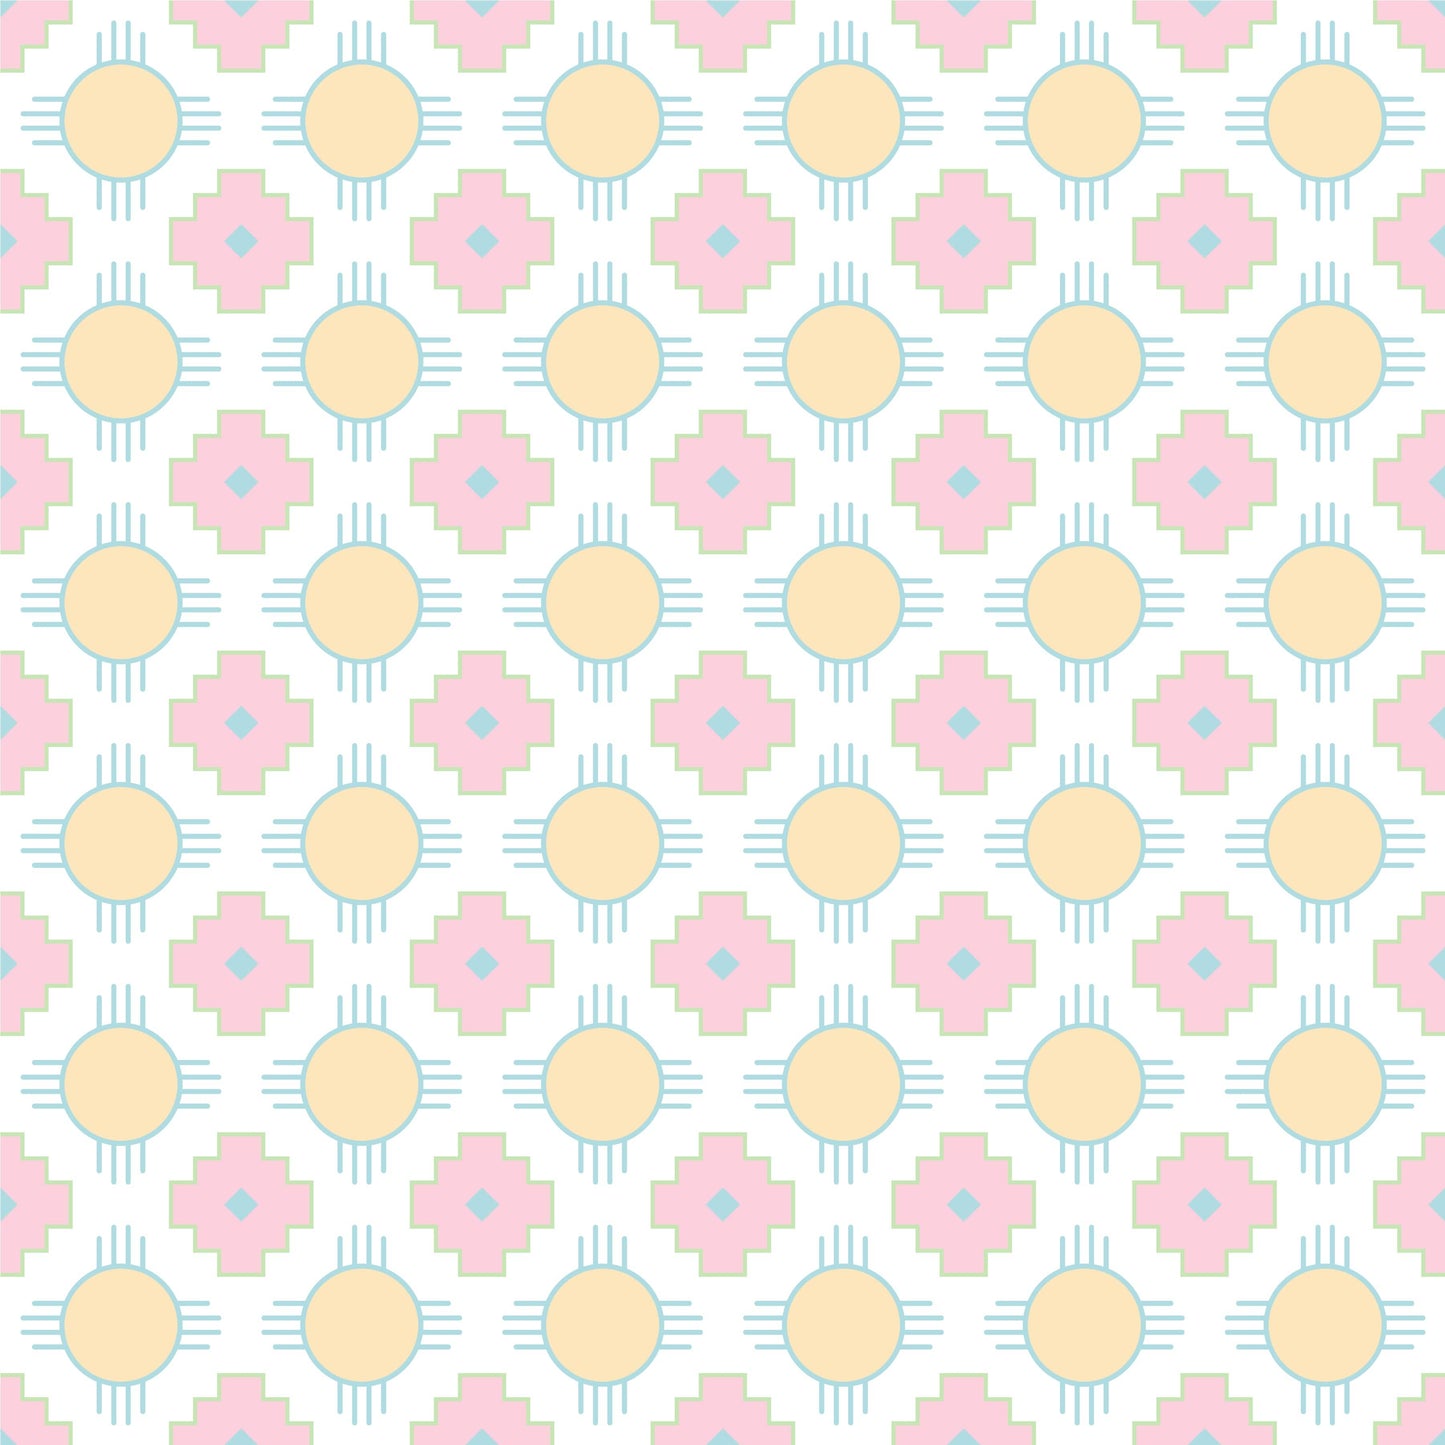 The Sunset Crossroads pattern from HowdyHo displays an inviting array of soft pink crosses and radiant yellow suns on a gentle white background. This fabric design captures the soothing colors of a sunset, ideal for creating a tranquil and stylish garment suitable for the HowdyHo casual wear line.